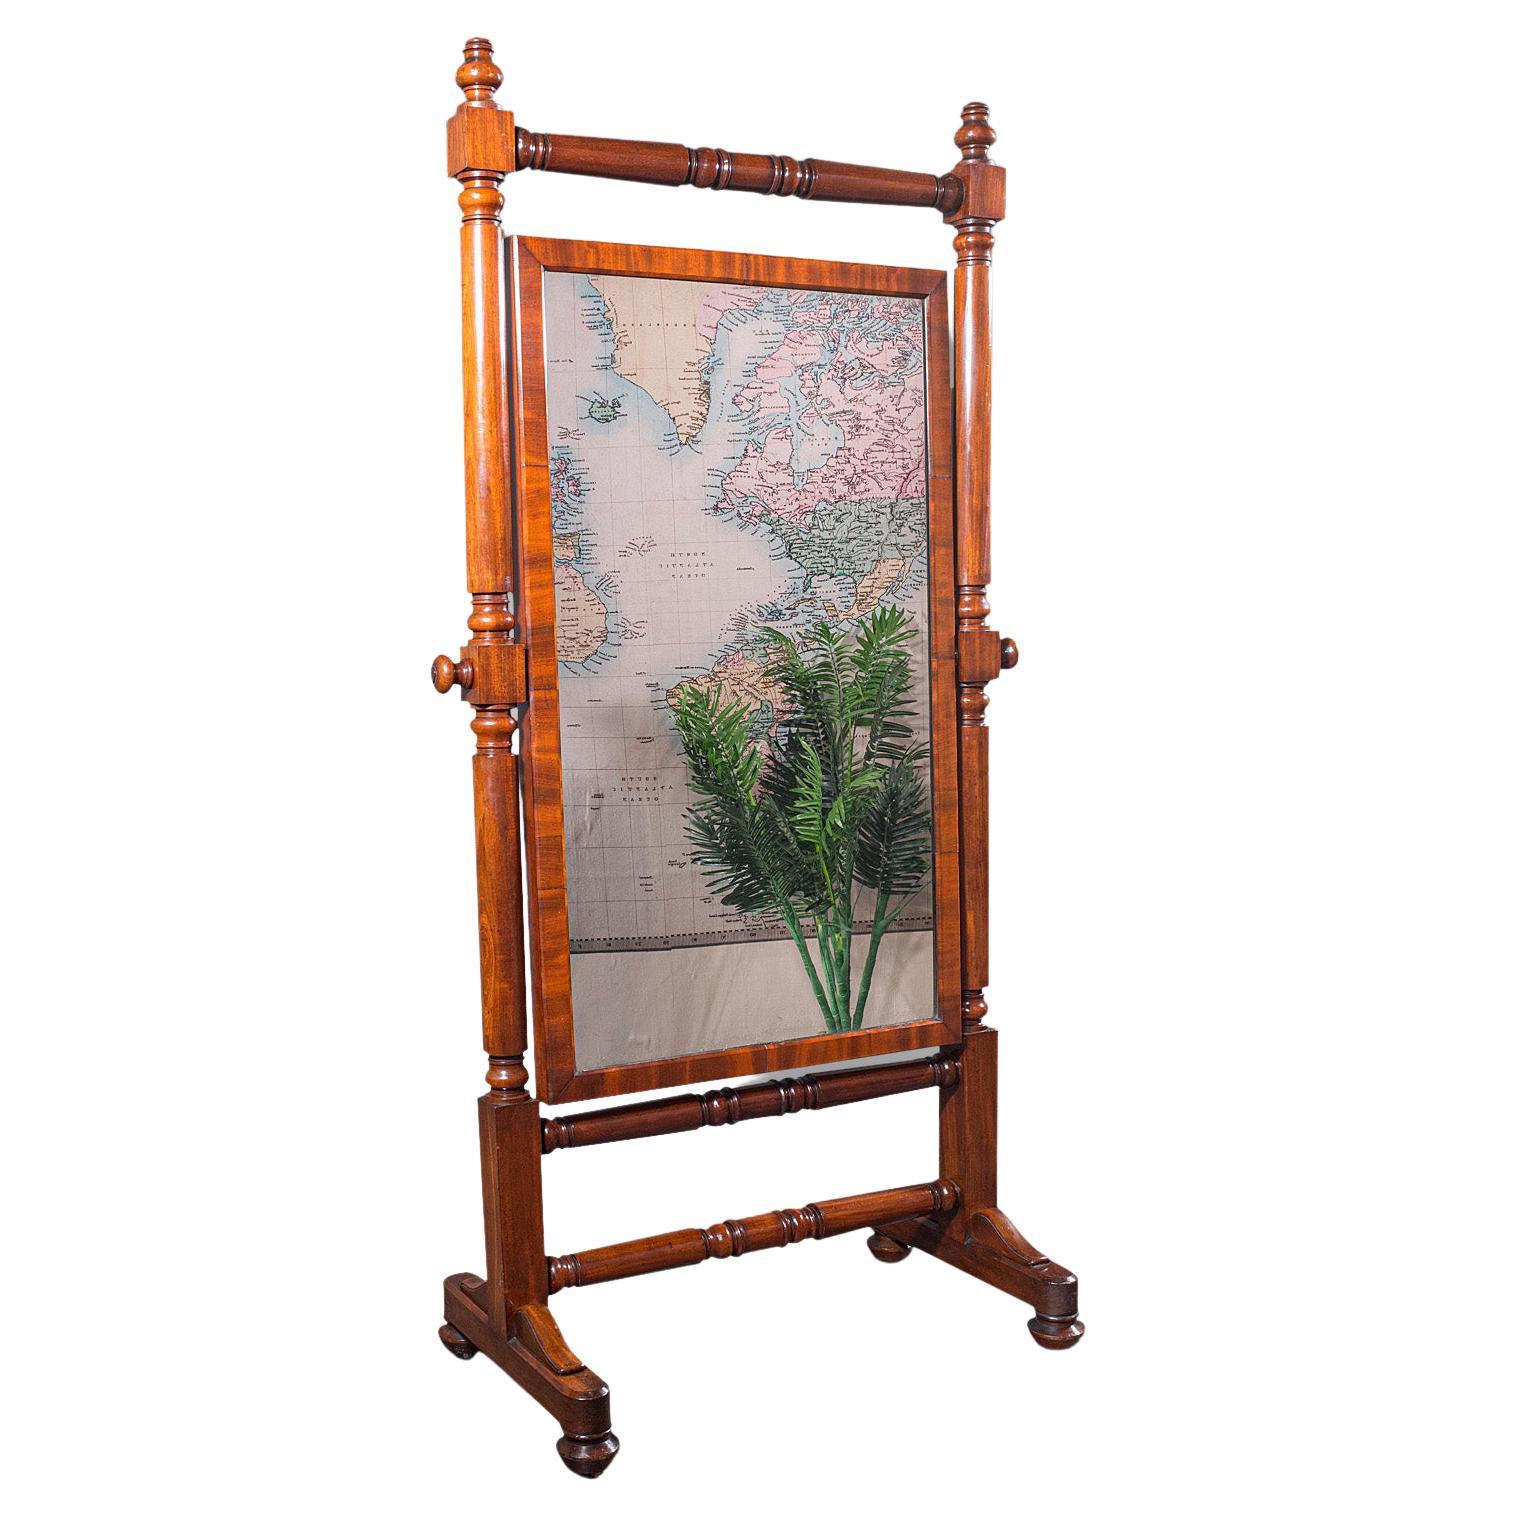 Grand Antique Cheval Mirror, English, Dressing, Country House, Victorian, C.1880 For Sale